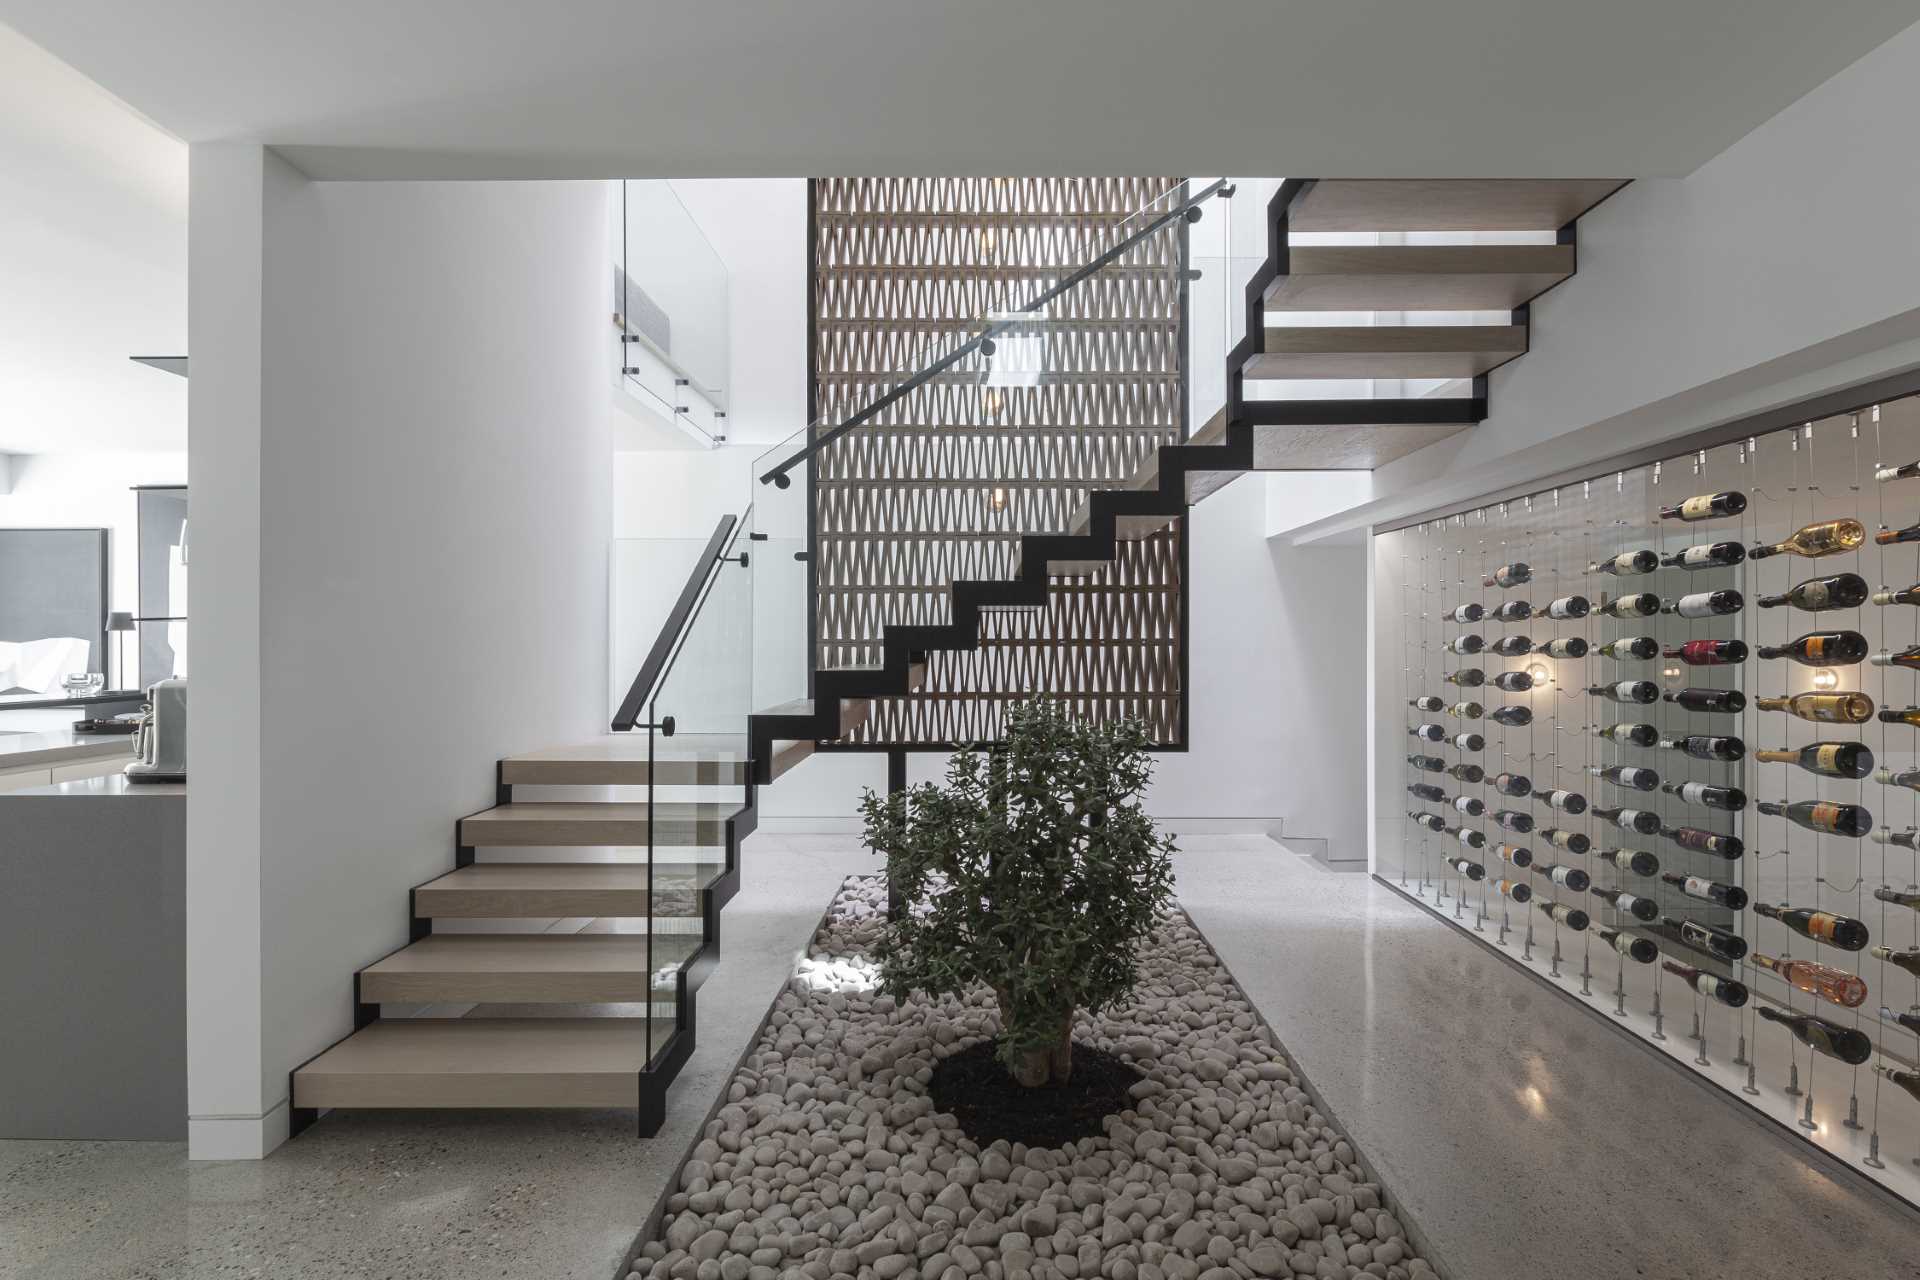 A modern staircase connects the various levels of this modern home, that includes wine storage.